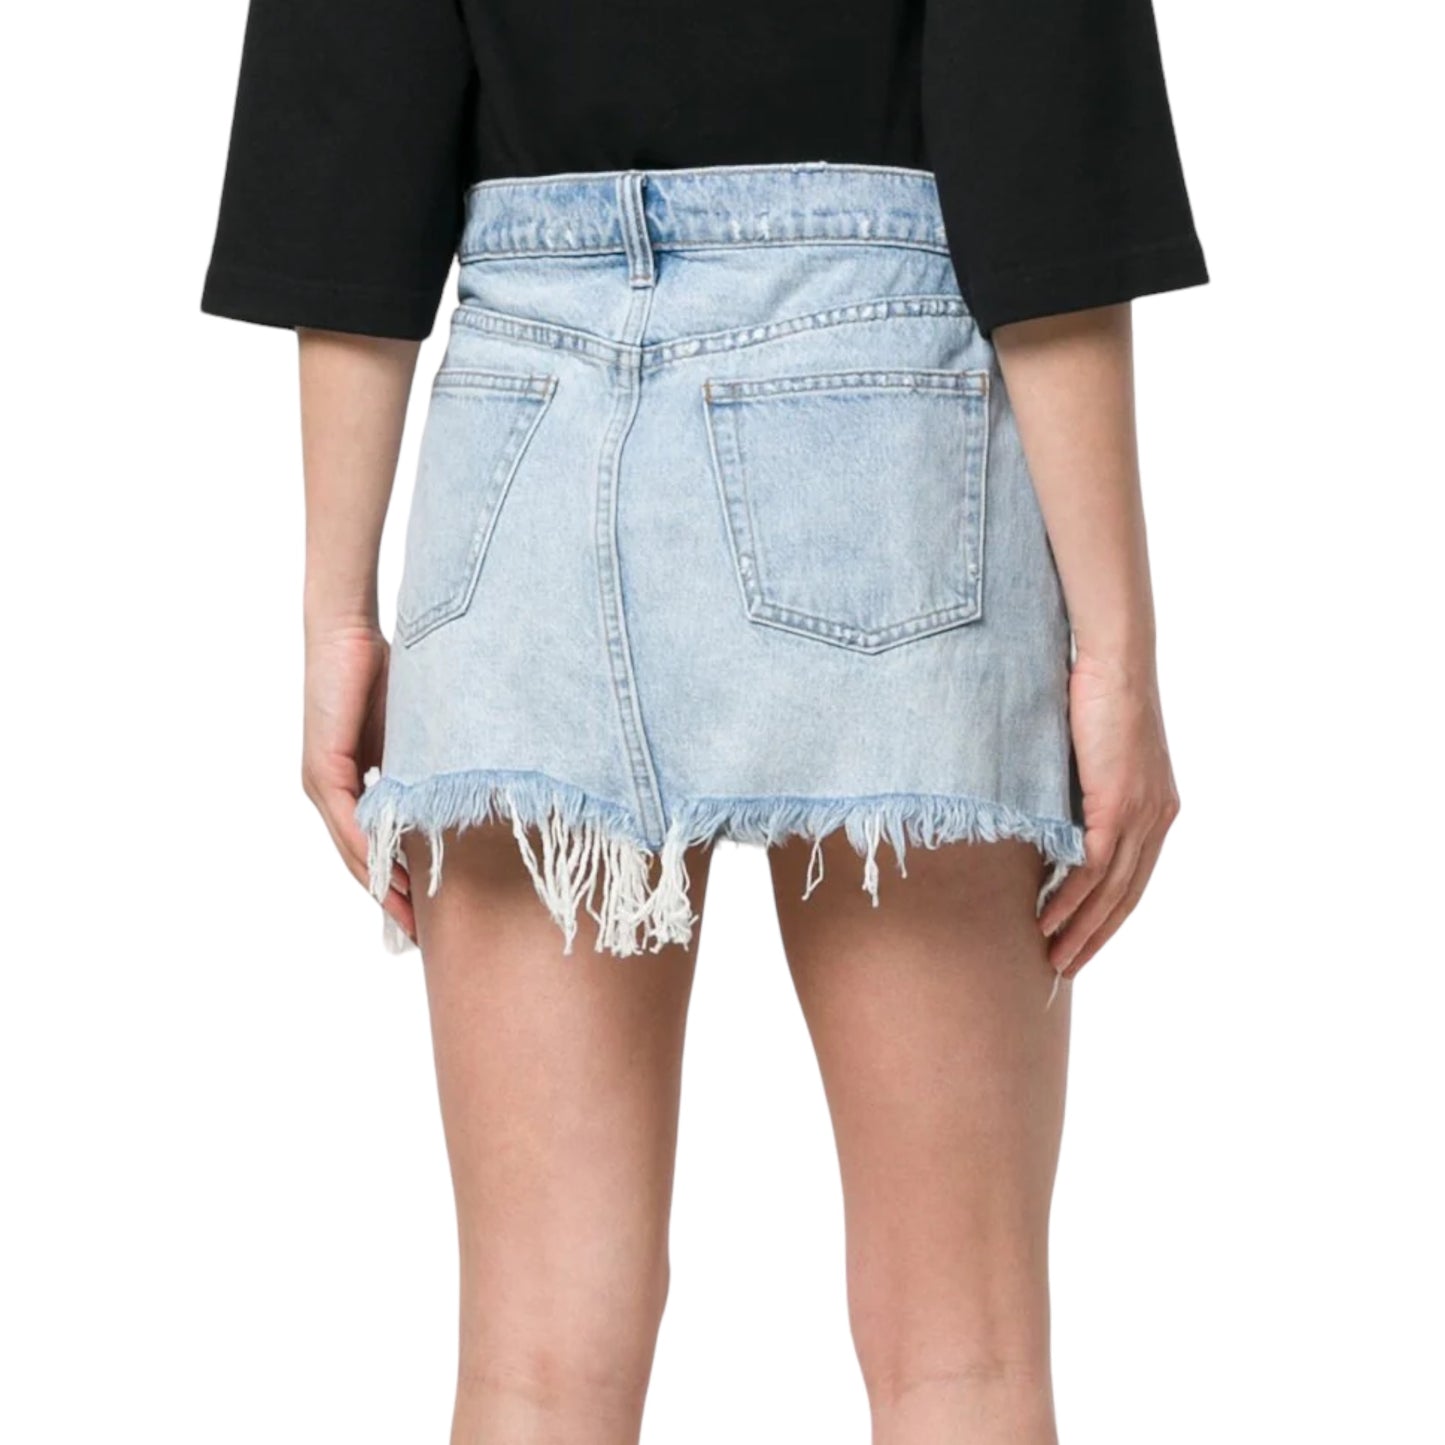 Denim Mini Skirt Size 30 NEW WITH TAGS